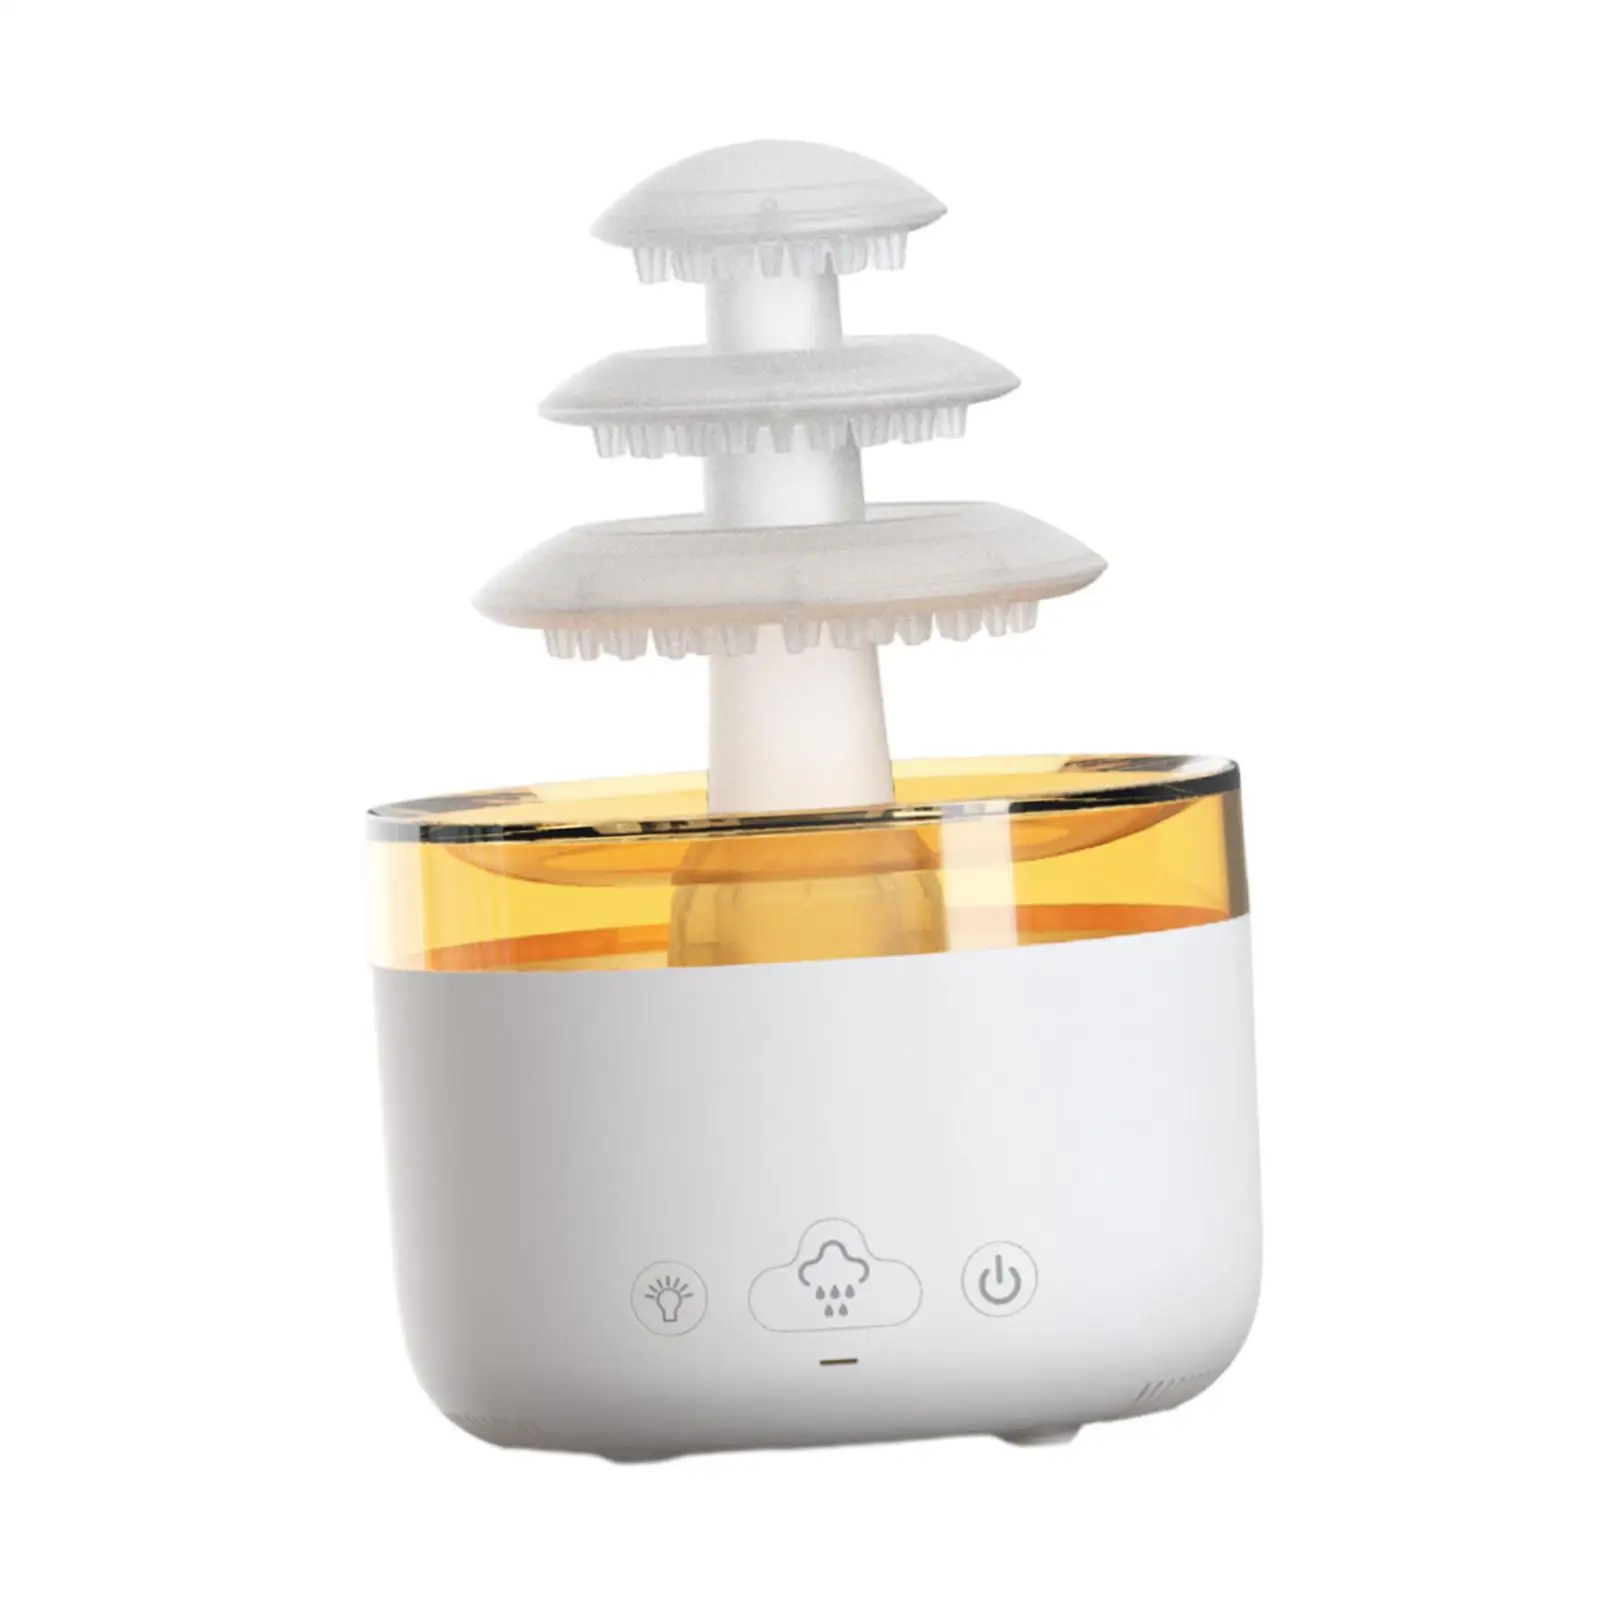 Essential Oil Diffuser Portable Premium 7 Colors Lights Changing 500ml Diffusers for Study Bathroom Home Decor Large Room Toilet